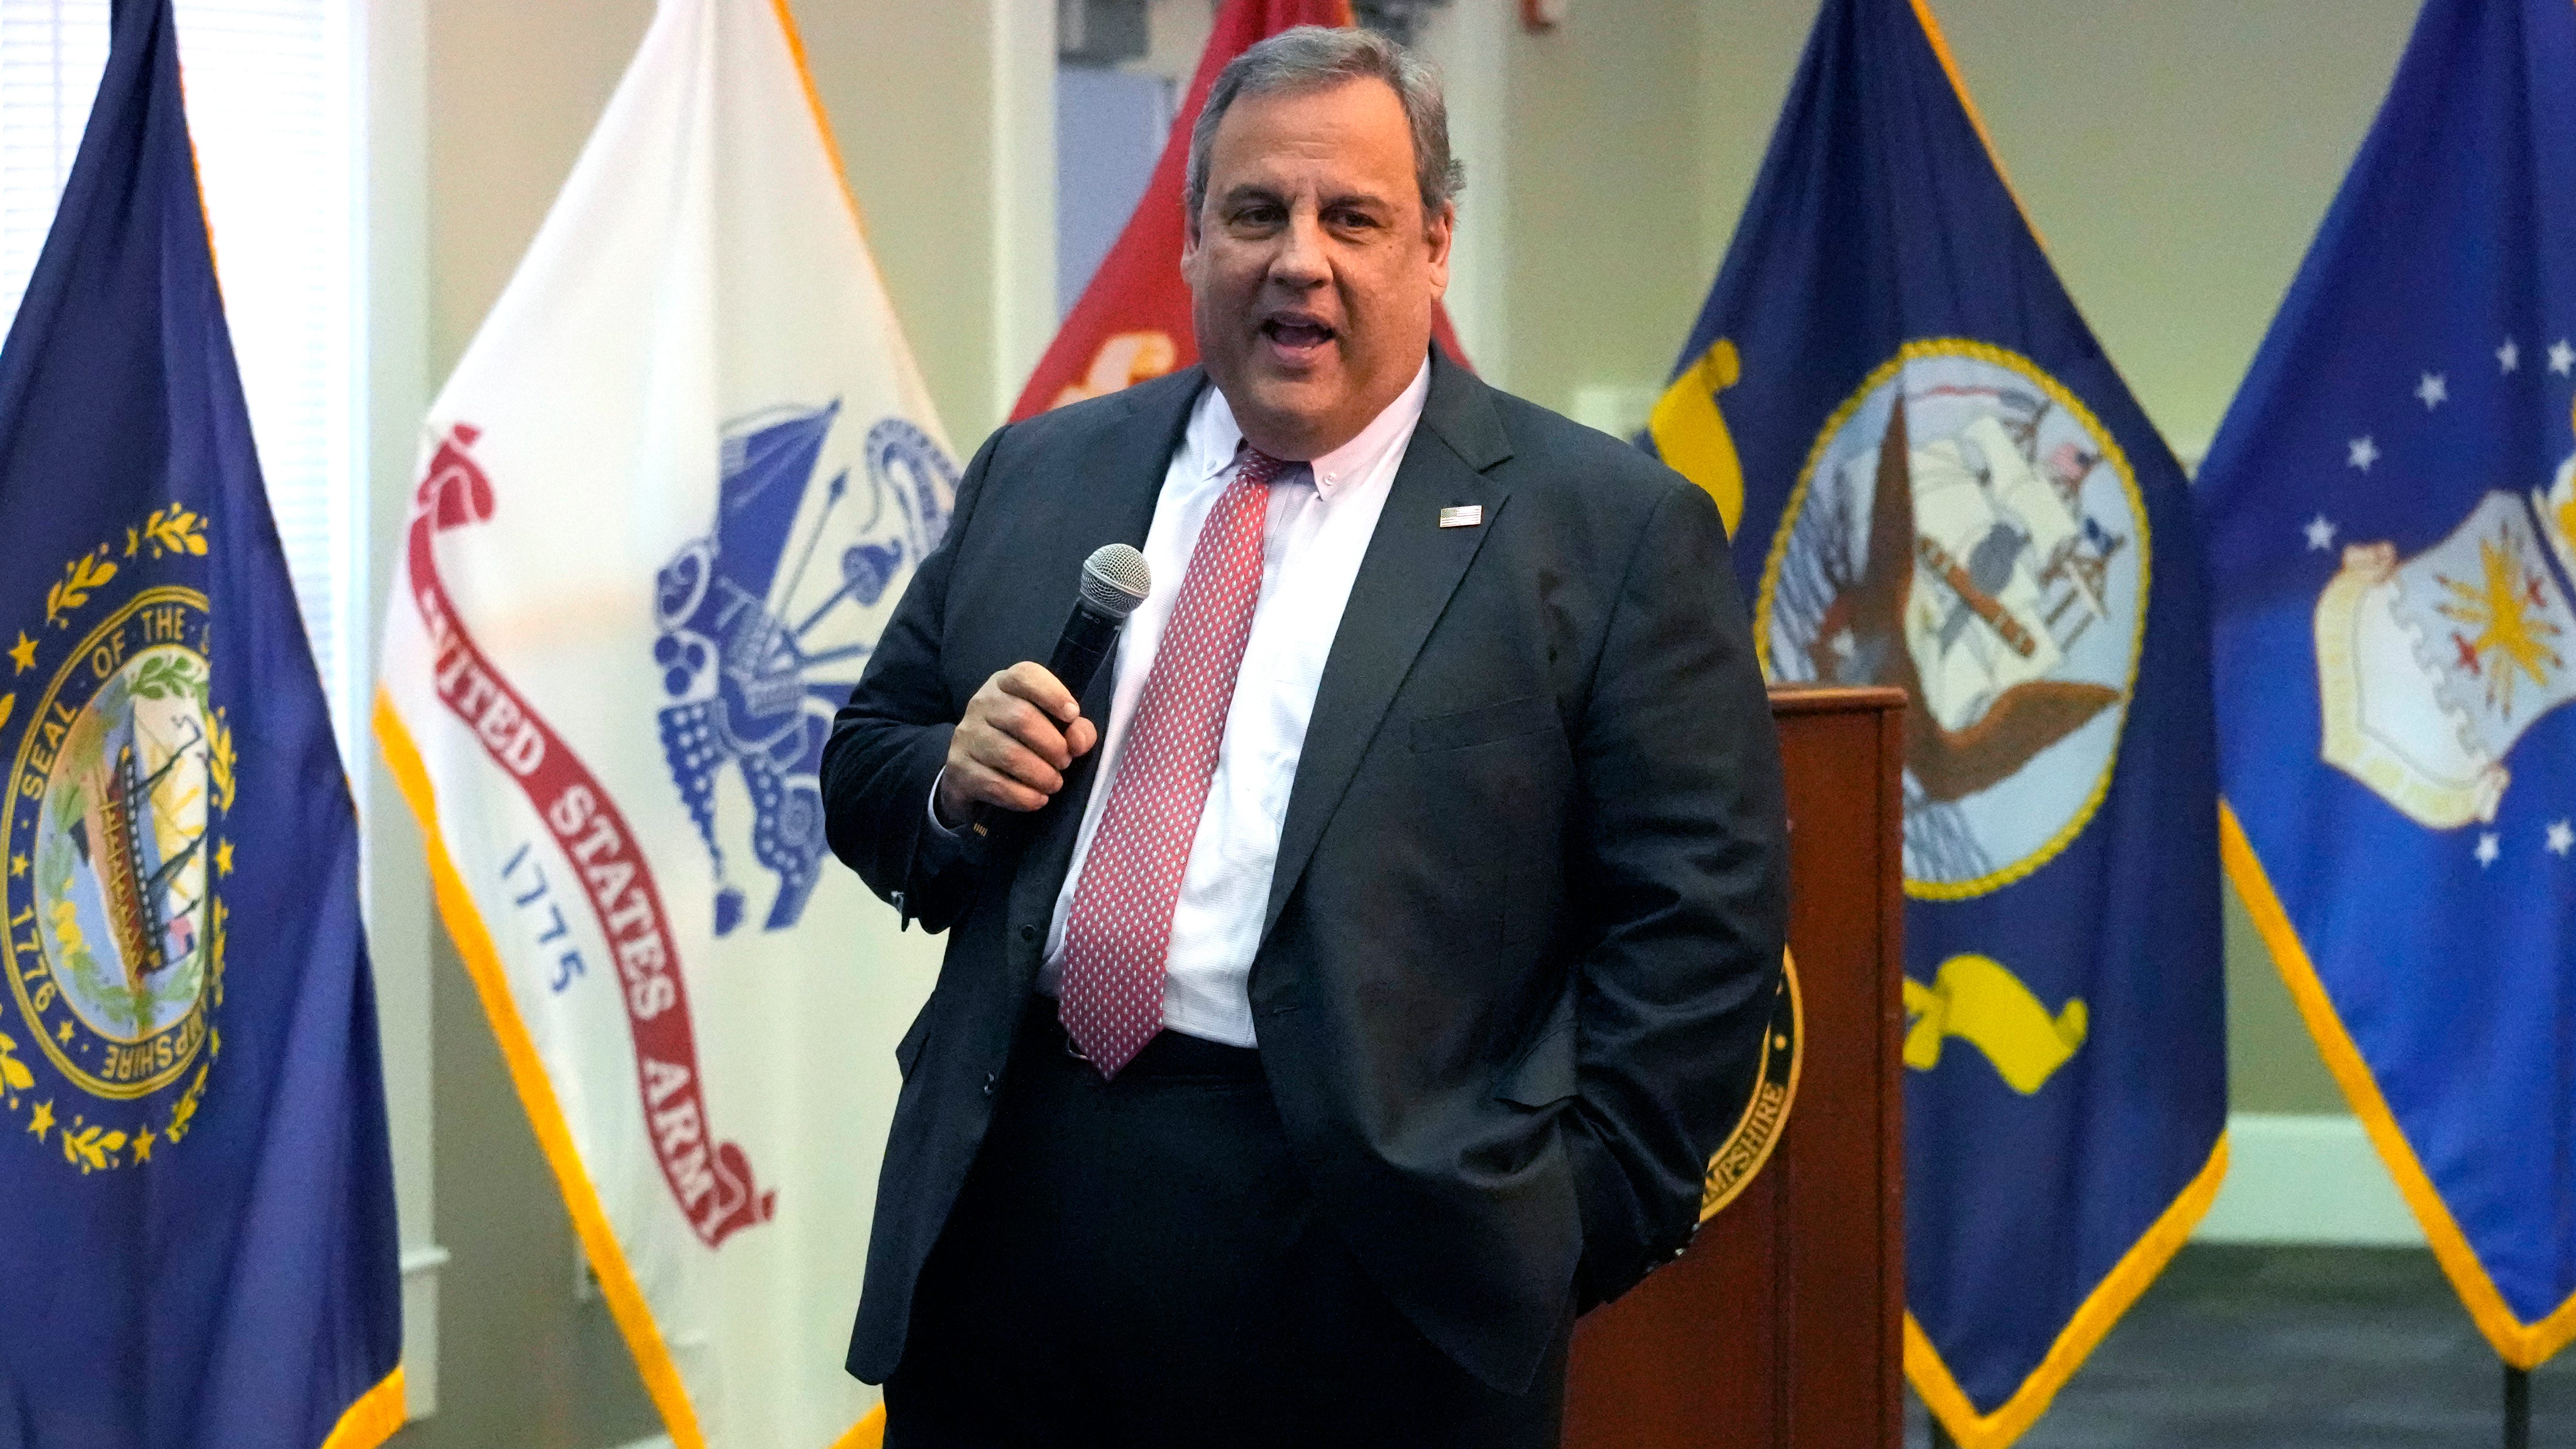 Chris Christie, former NJ governor, will announce his candidacy for president in 2024 race